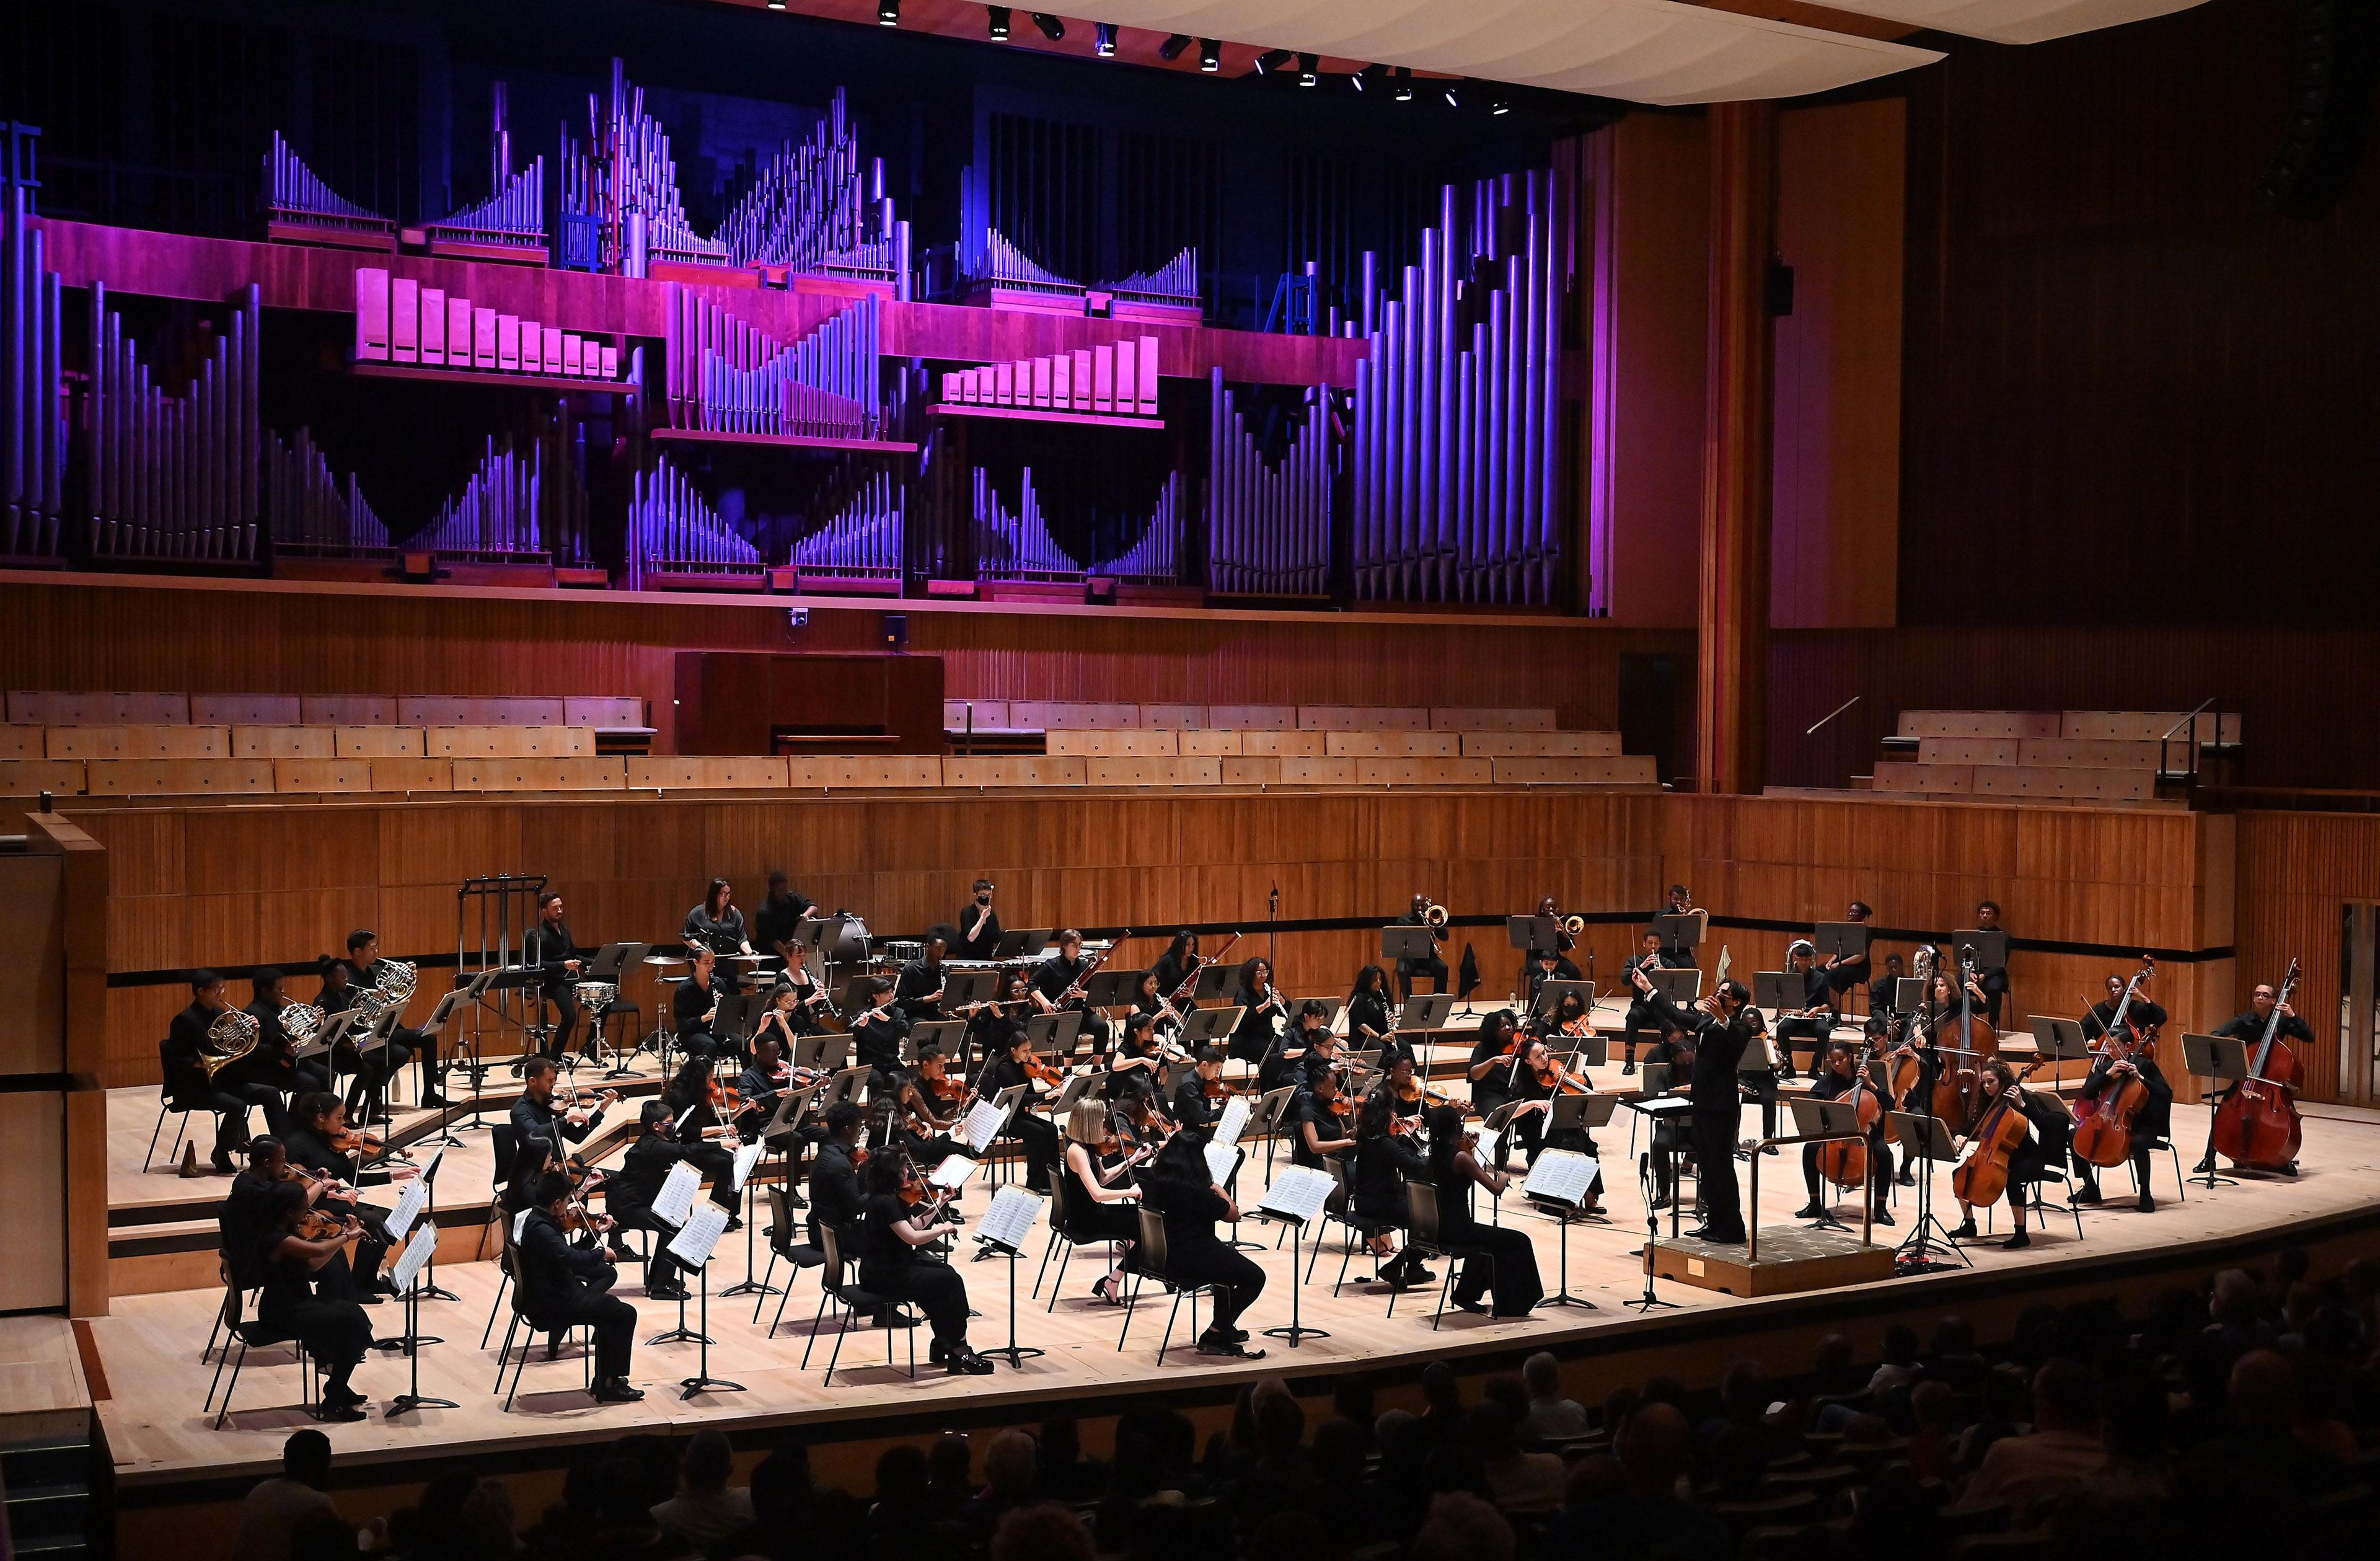 Chineke! Junior Orchestra on stage at the Royal Festival Hall